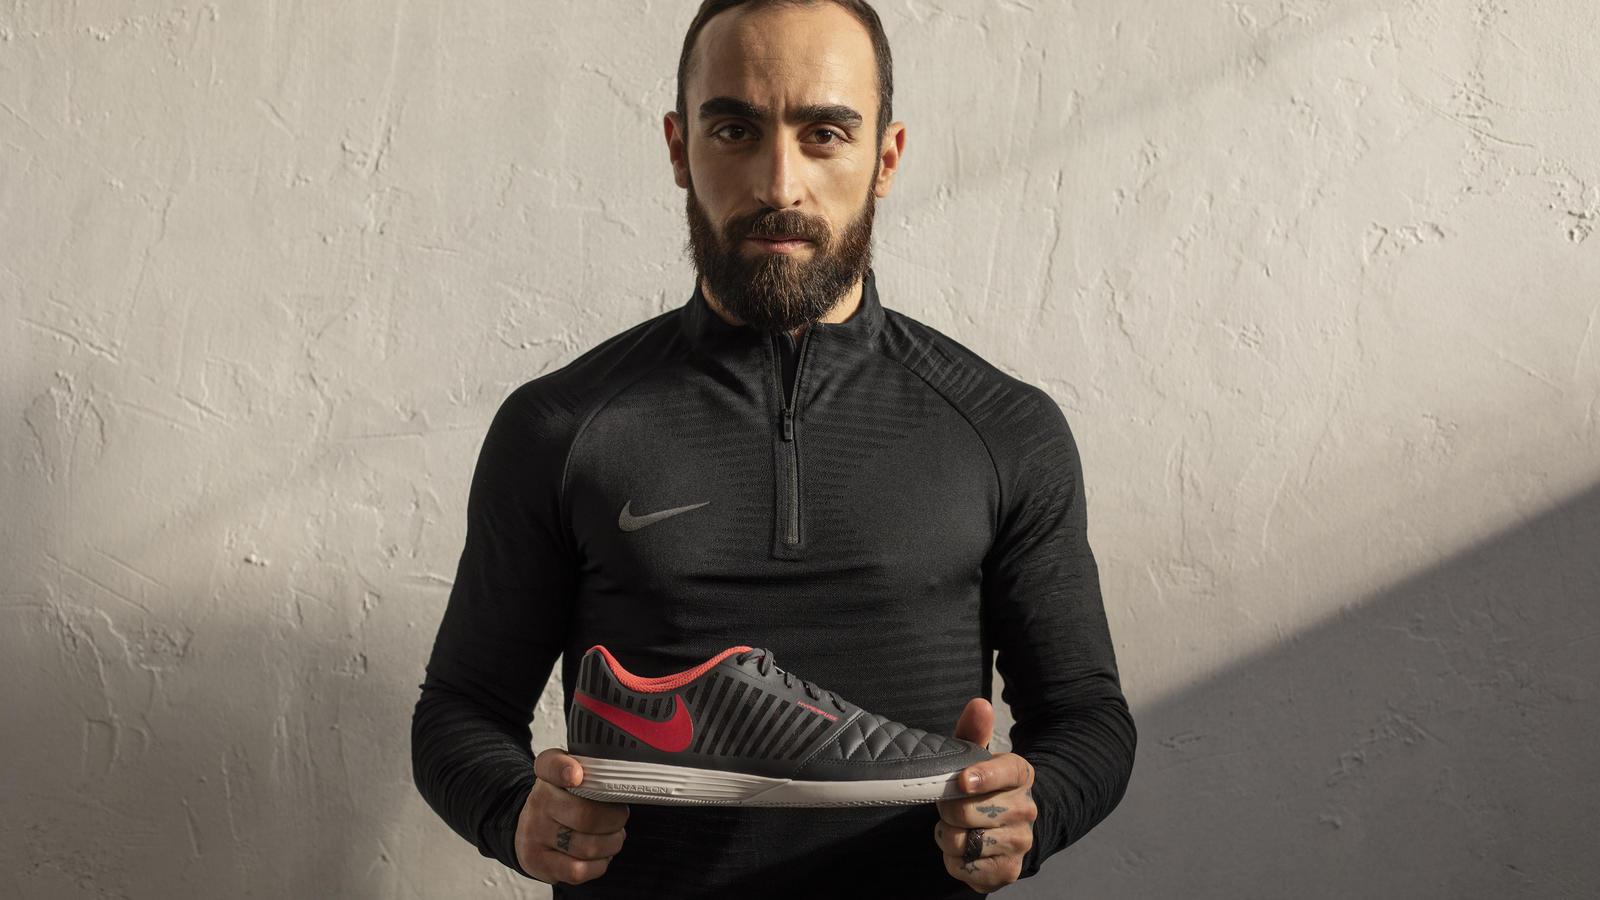 Migración Seis encanto ineews on Twitter: "Very stylish and supportive: The iconic Nike Lunagarto  II are back #nike #portugal #portuguese #ricardinho #shoes #sports  https://t.co/TeX0ersRNc https://t.co/4IRBtqA2qK" / Twitter